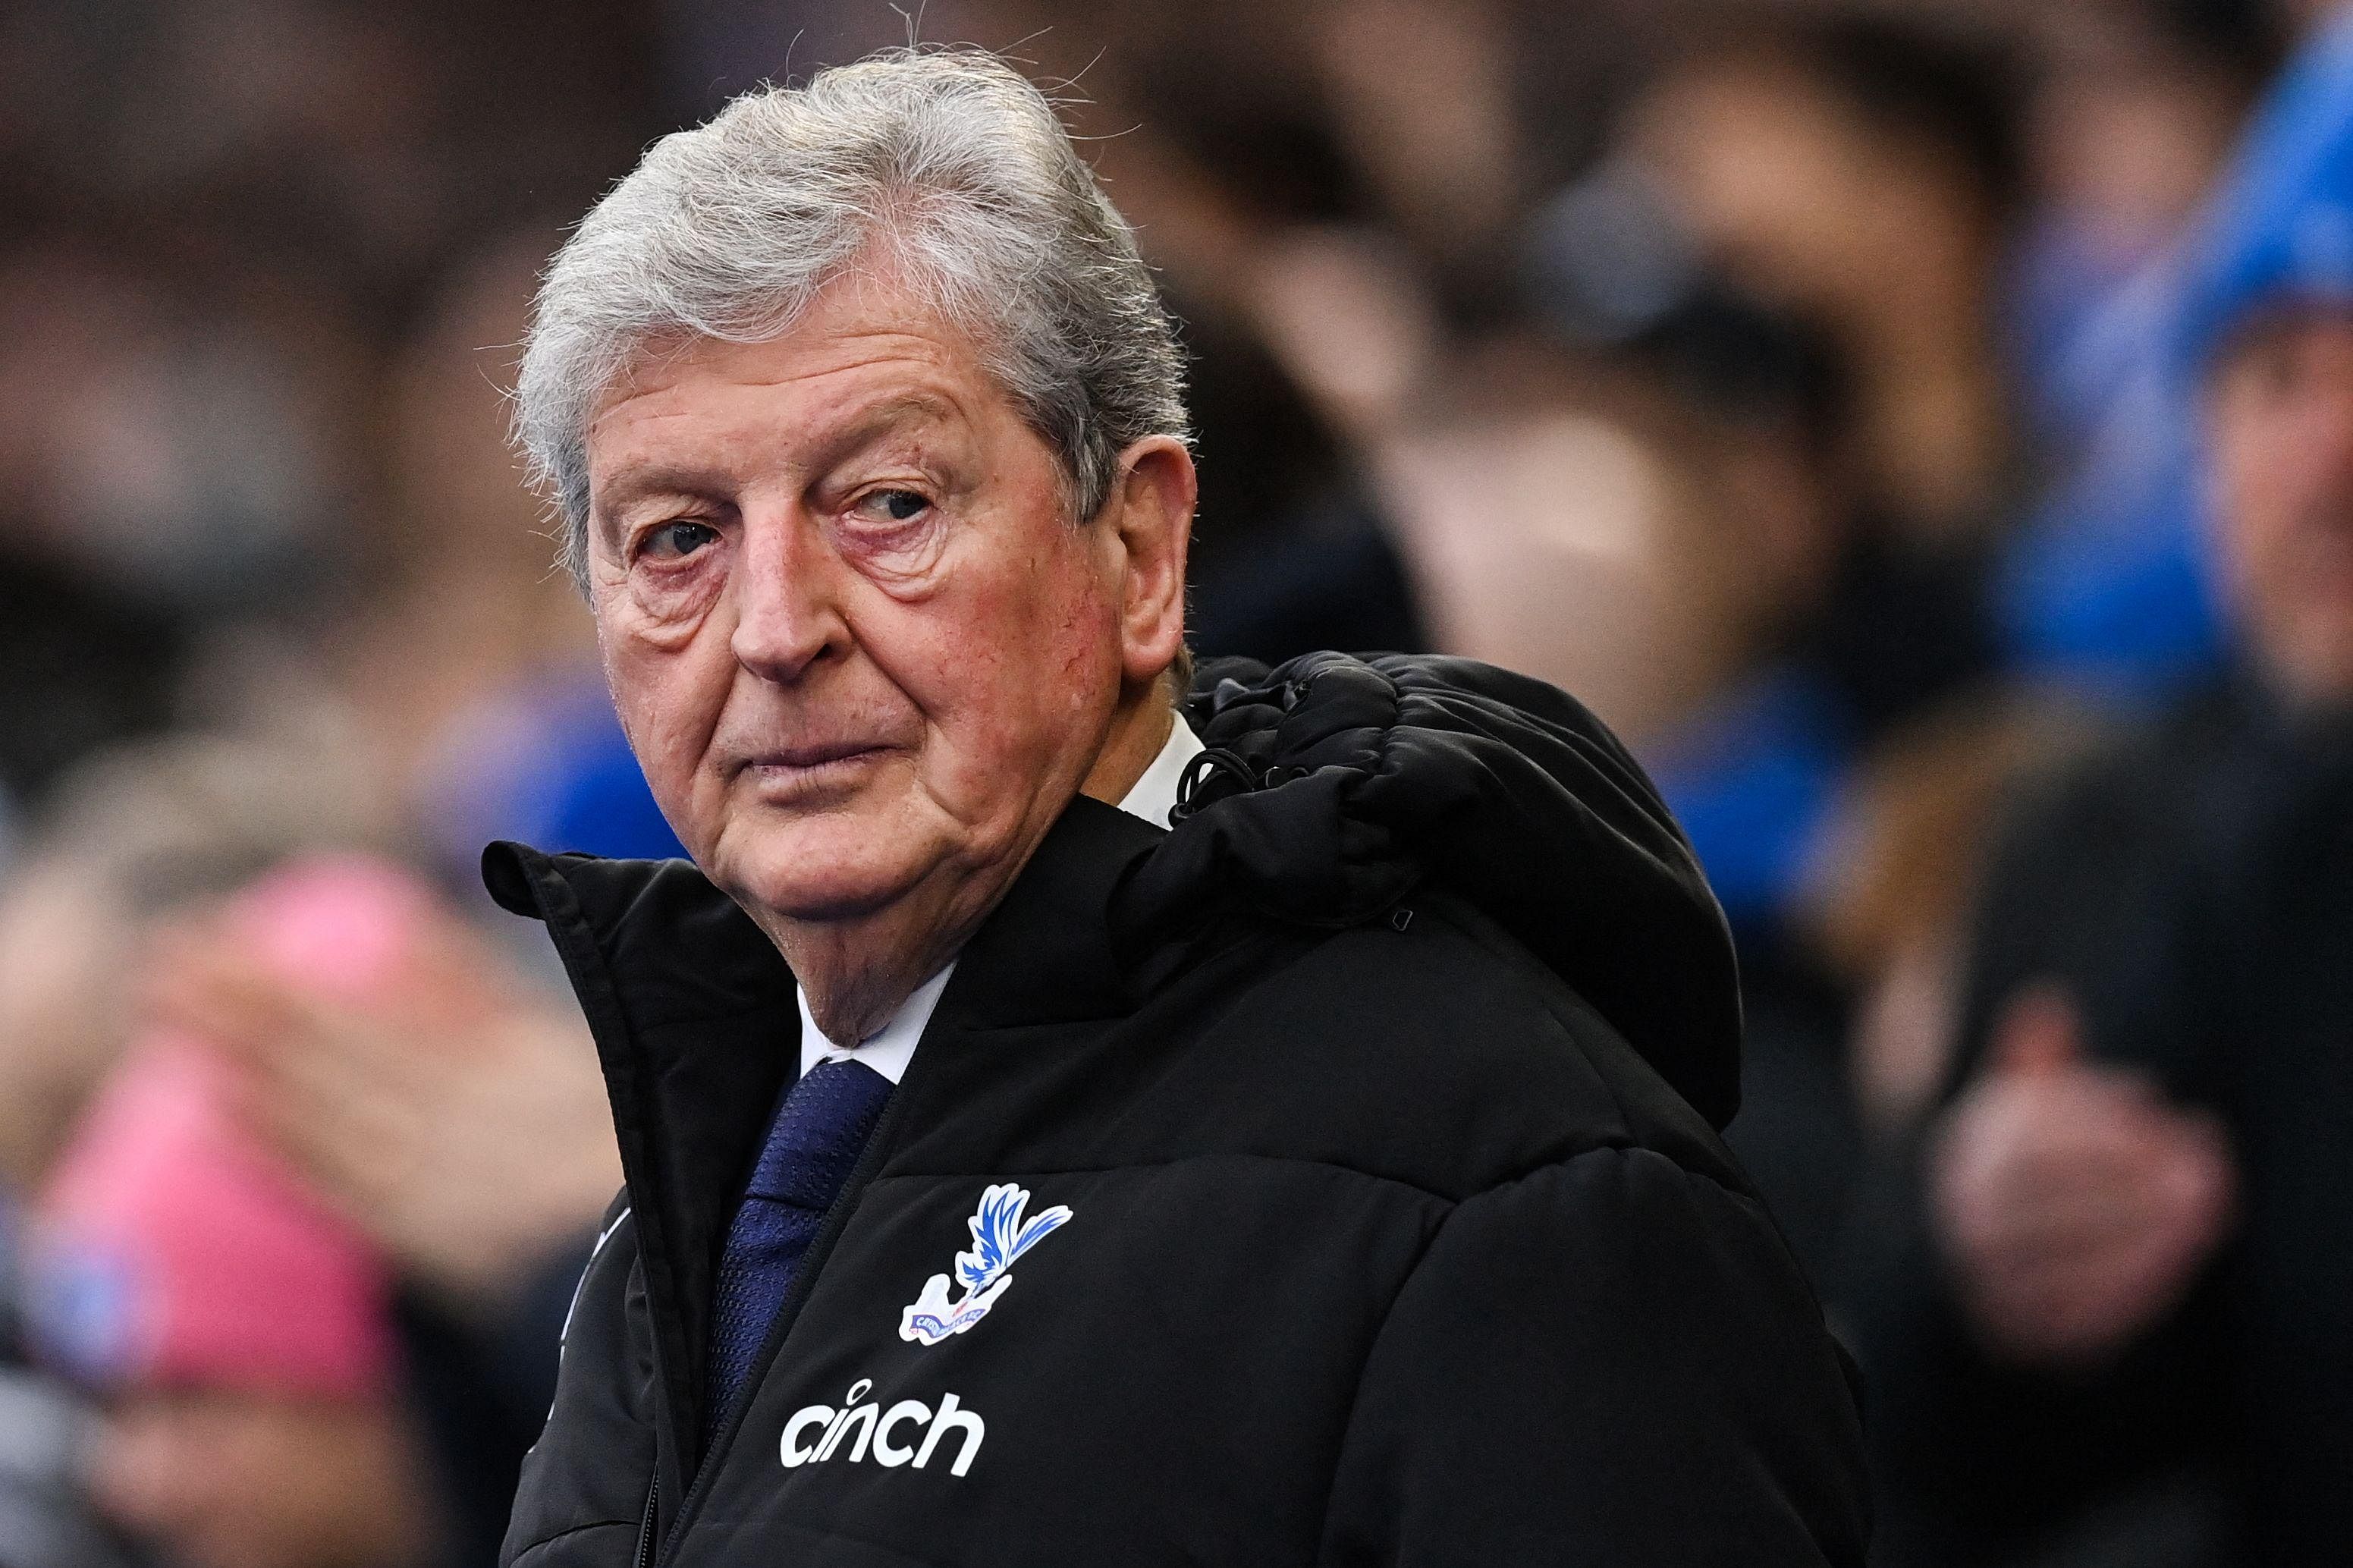 Crystal Palace manager Roy Hodgson ‘stable’ in hospital after illness